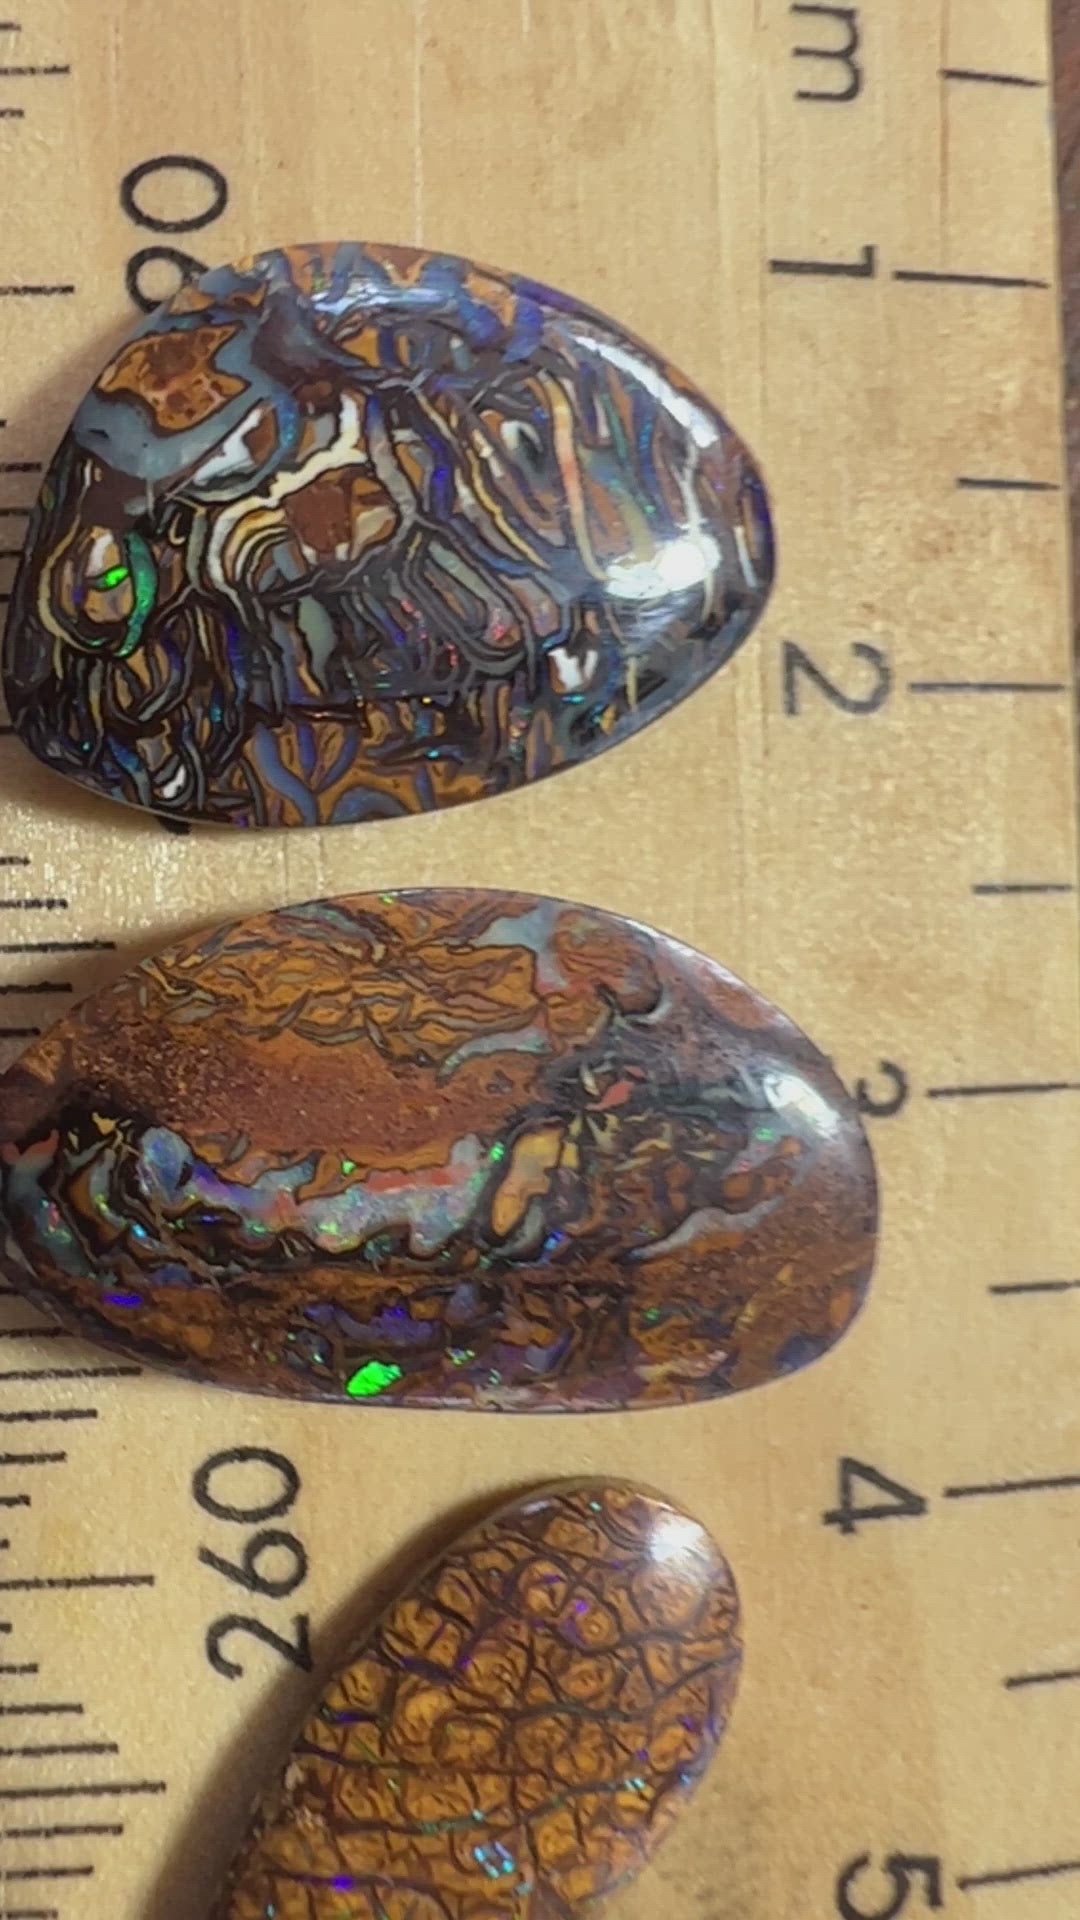 Lovely group of Queensland boulder opals with great patterns and colour.